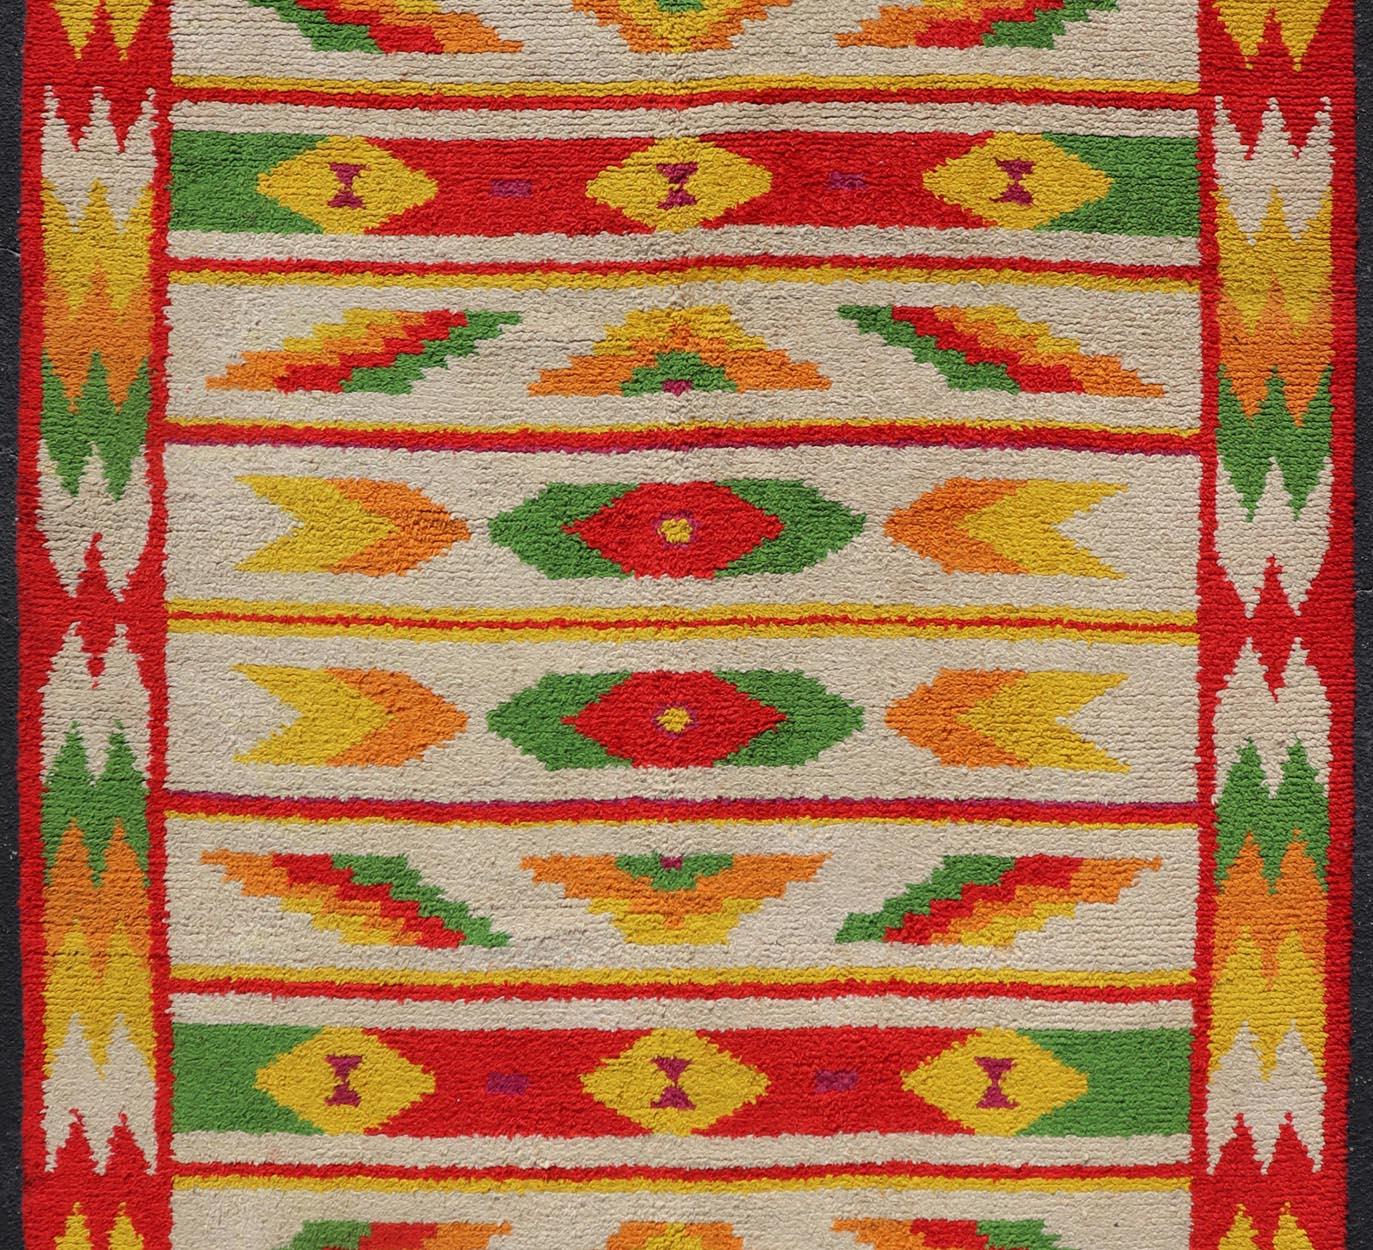 Vintage Moroccan Rug with All-Over Tribal Motif Design In Red, Green & Yellow For Sale 2